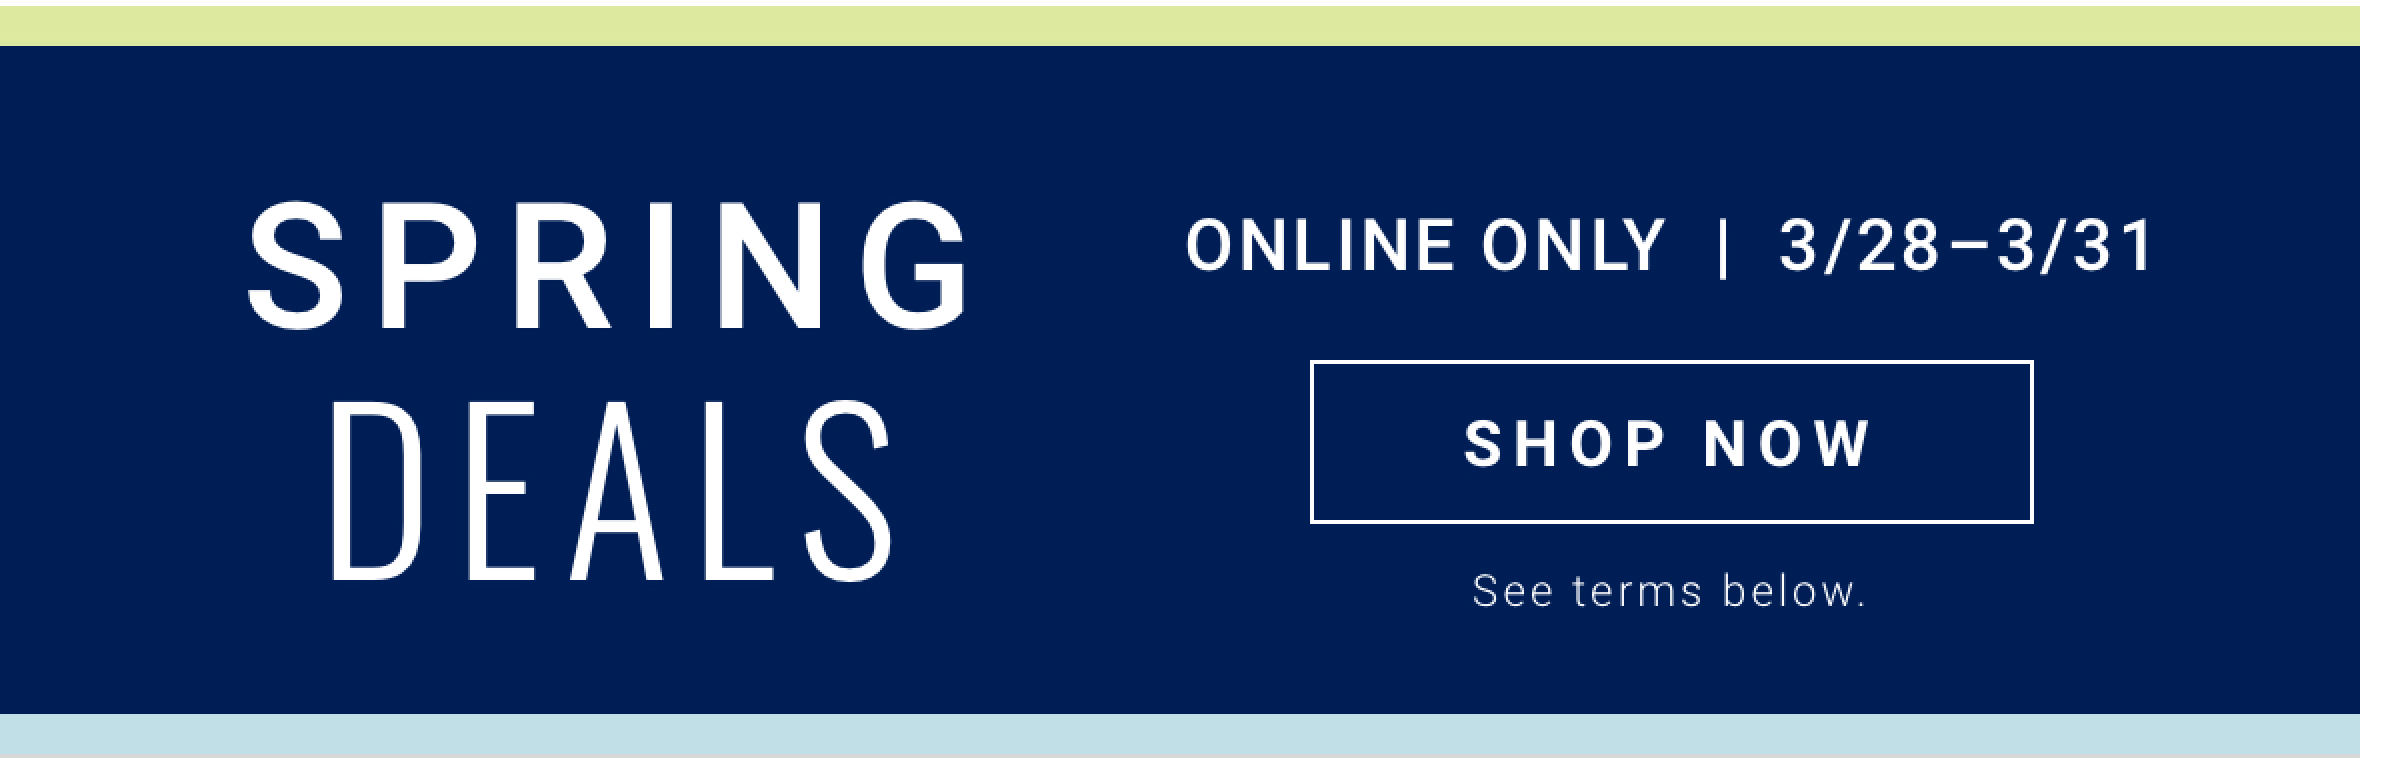 Shop these spring deals online now through March 31